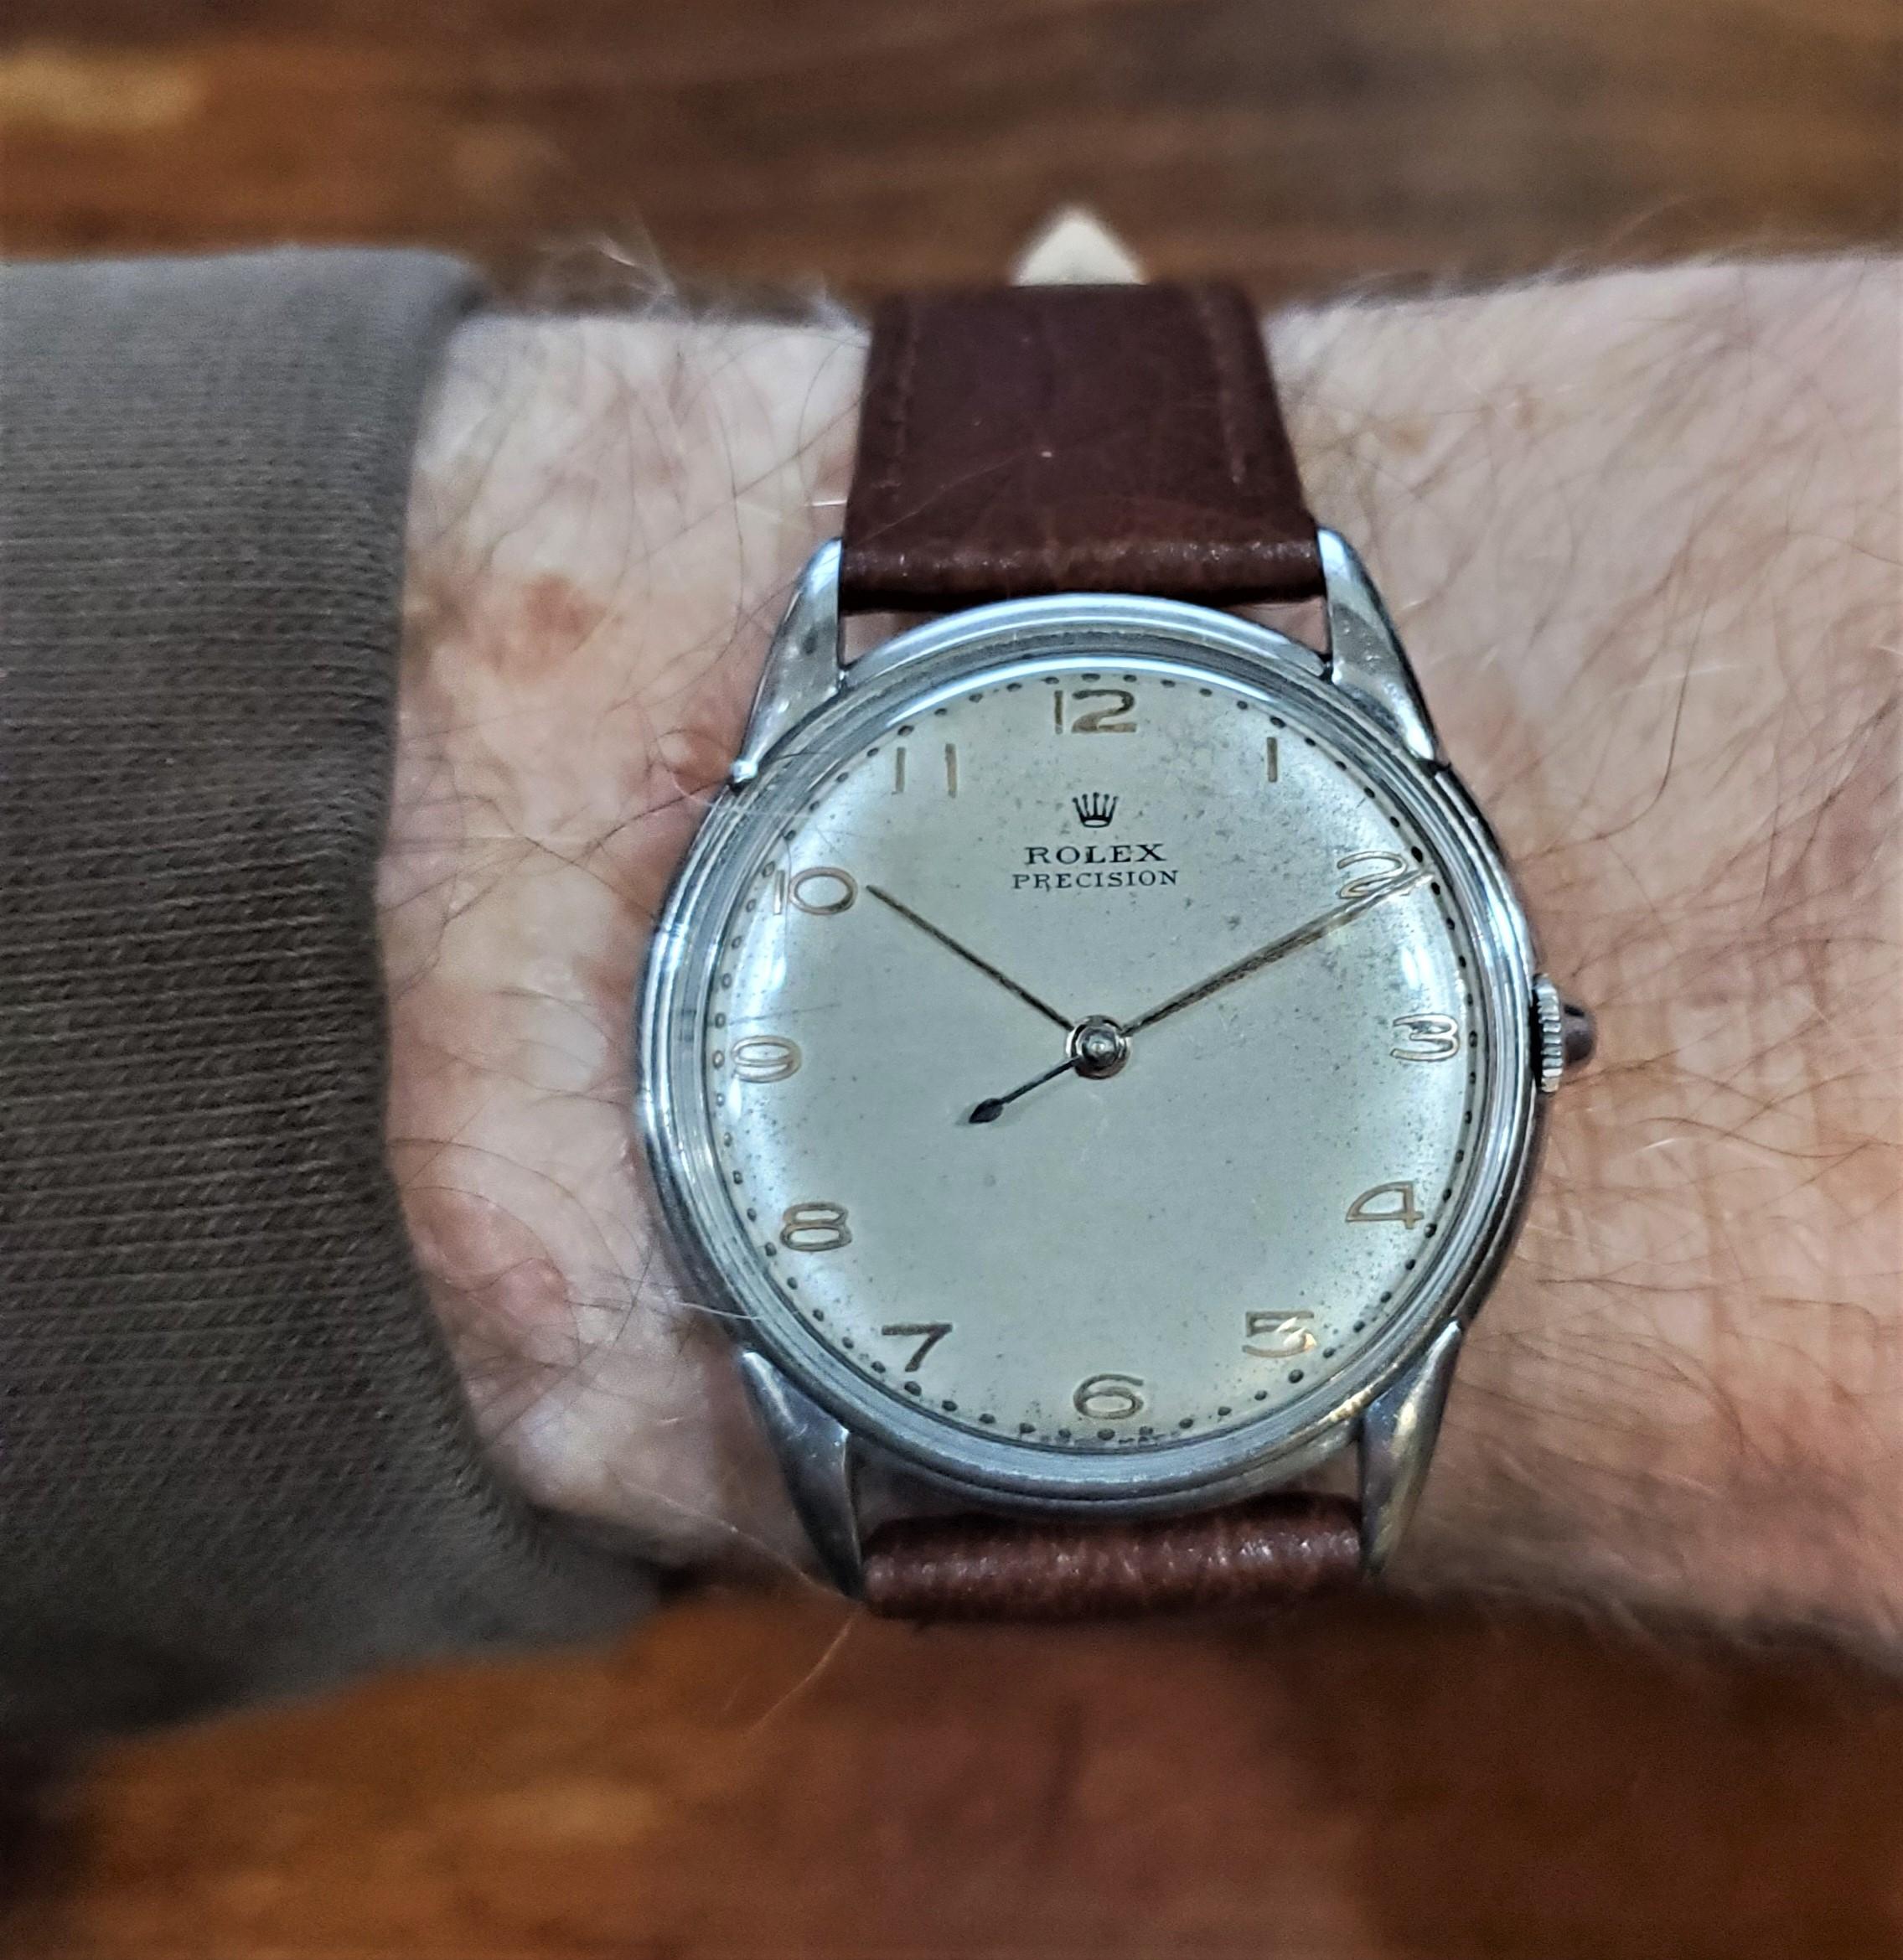 Rolex Precision 4219 stainless steel  watch, circa 1950's.  The watch measures 35mm x 10mm thick.  With 17-jewel manual winding movement.  The case/serial # 057022.  The watch is 100% original, dial, case, crown. 

The dial is original and has a